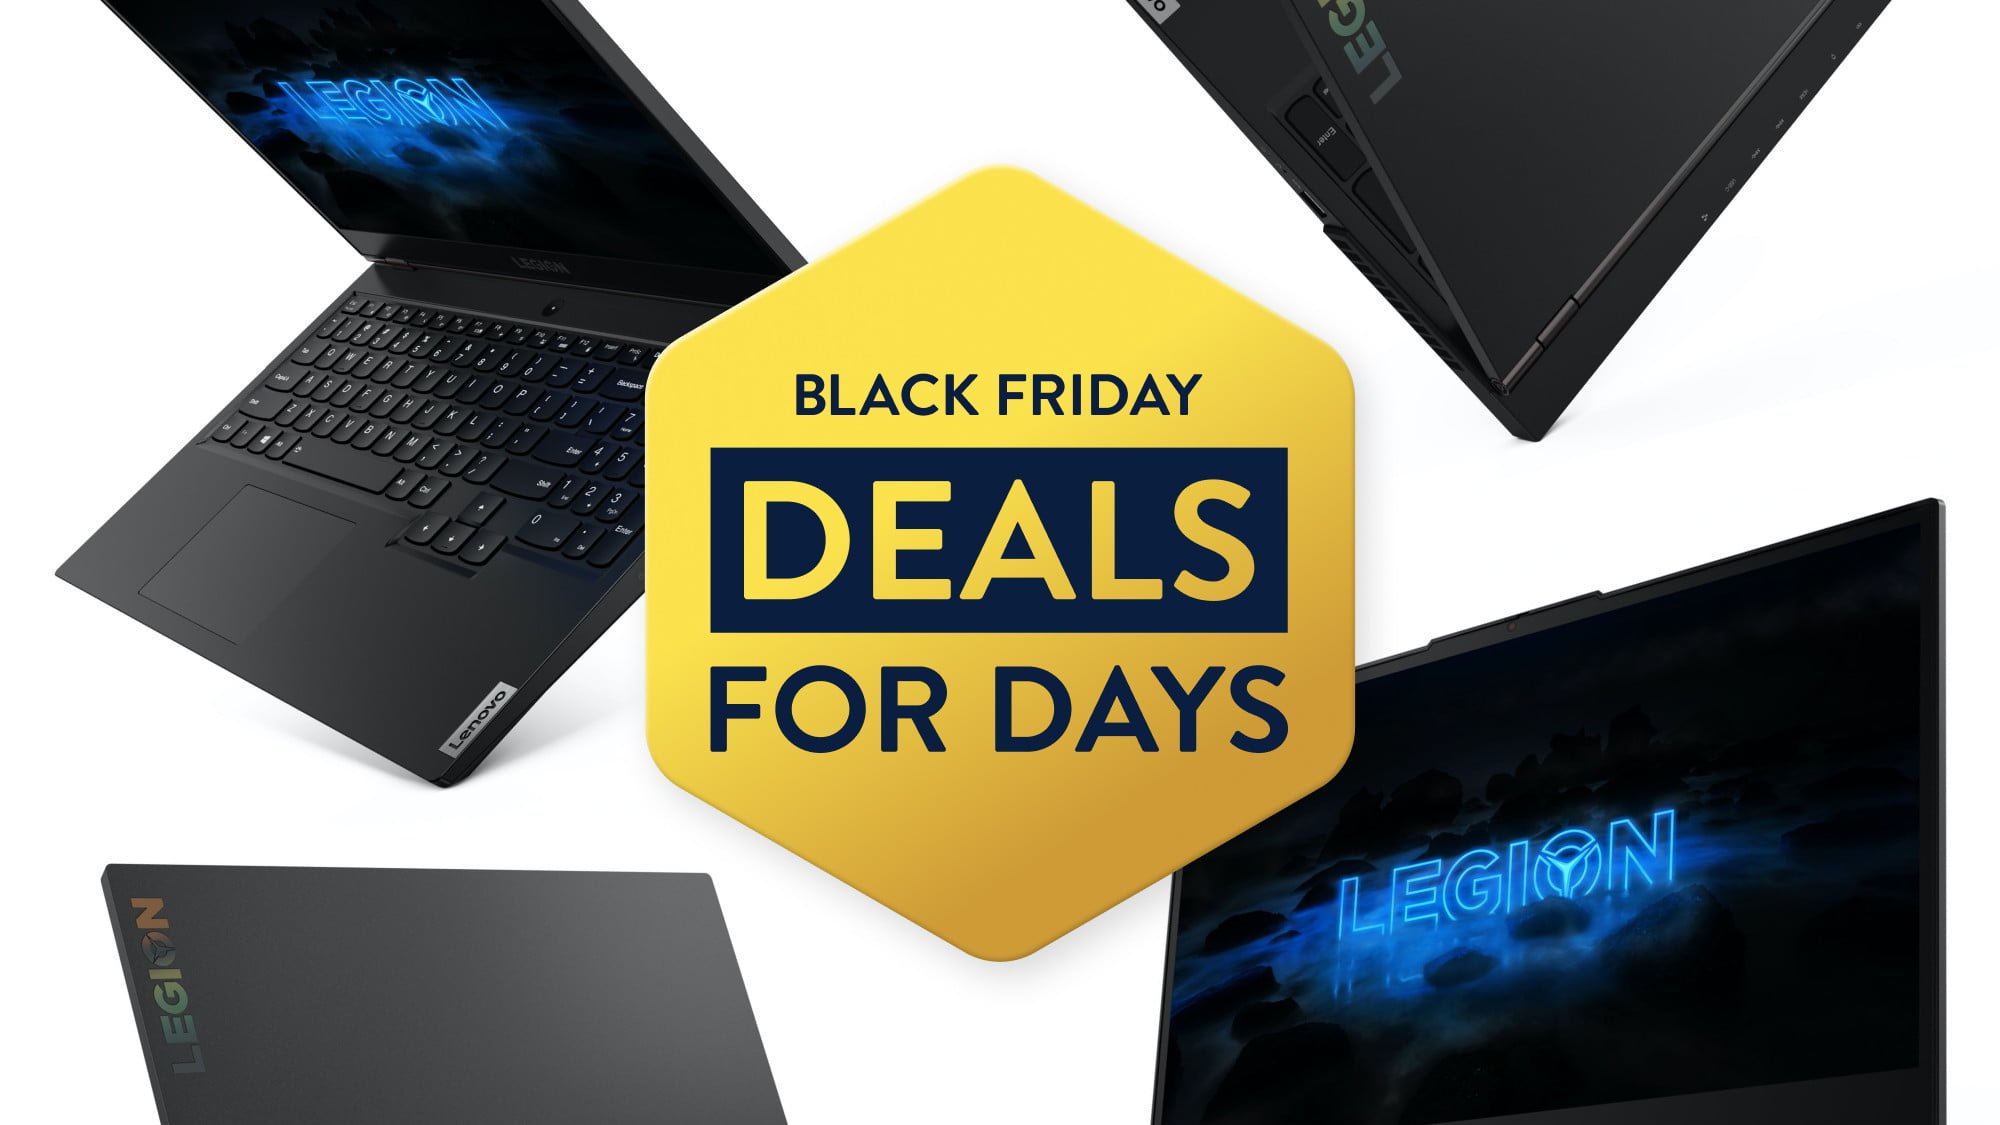 This Lenovo gaming laptop is $699 today, because Cyber Monday